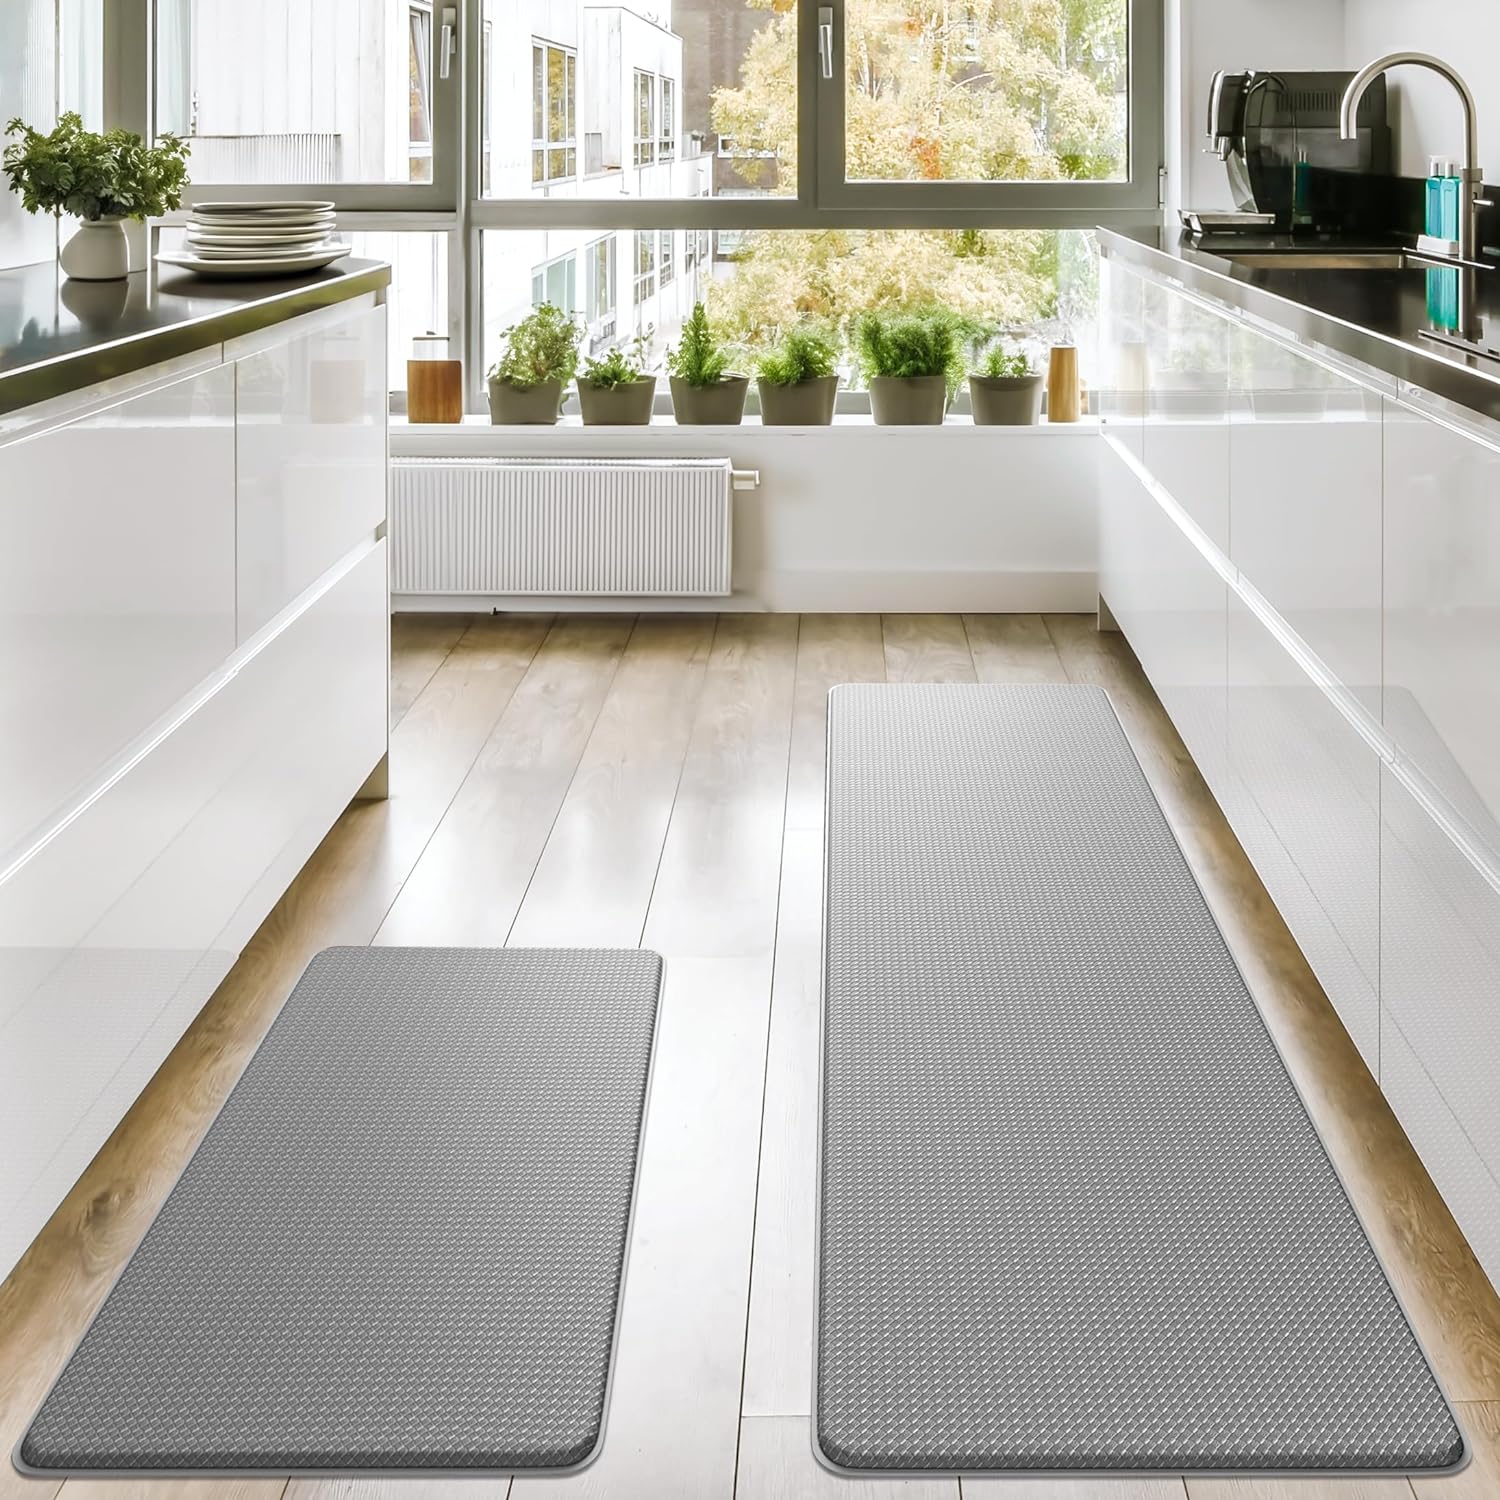 Homergy Anti Fatigue Kitchen Mats for Floor 2 PCS, Memory Foam Cushioned Rugs, Comfort Standing Desk Mats for Office, Home, Laundry Room, Waterproof & Ergonomic, 17.3×30.3 & 17.3×59, Grey